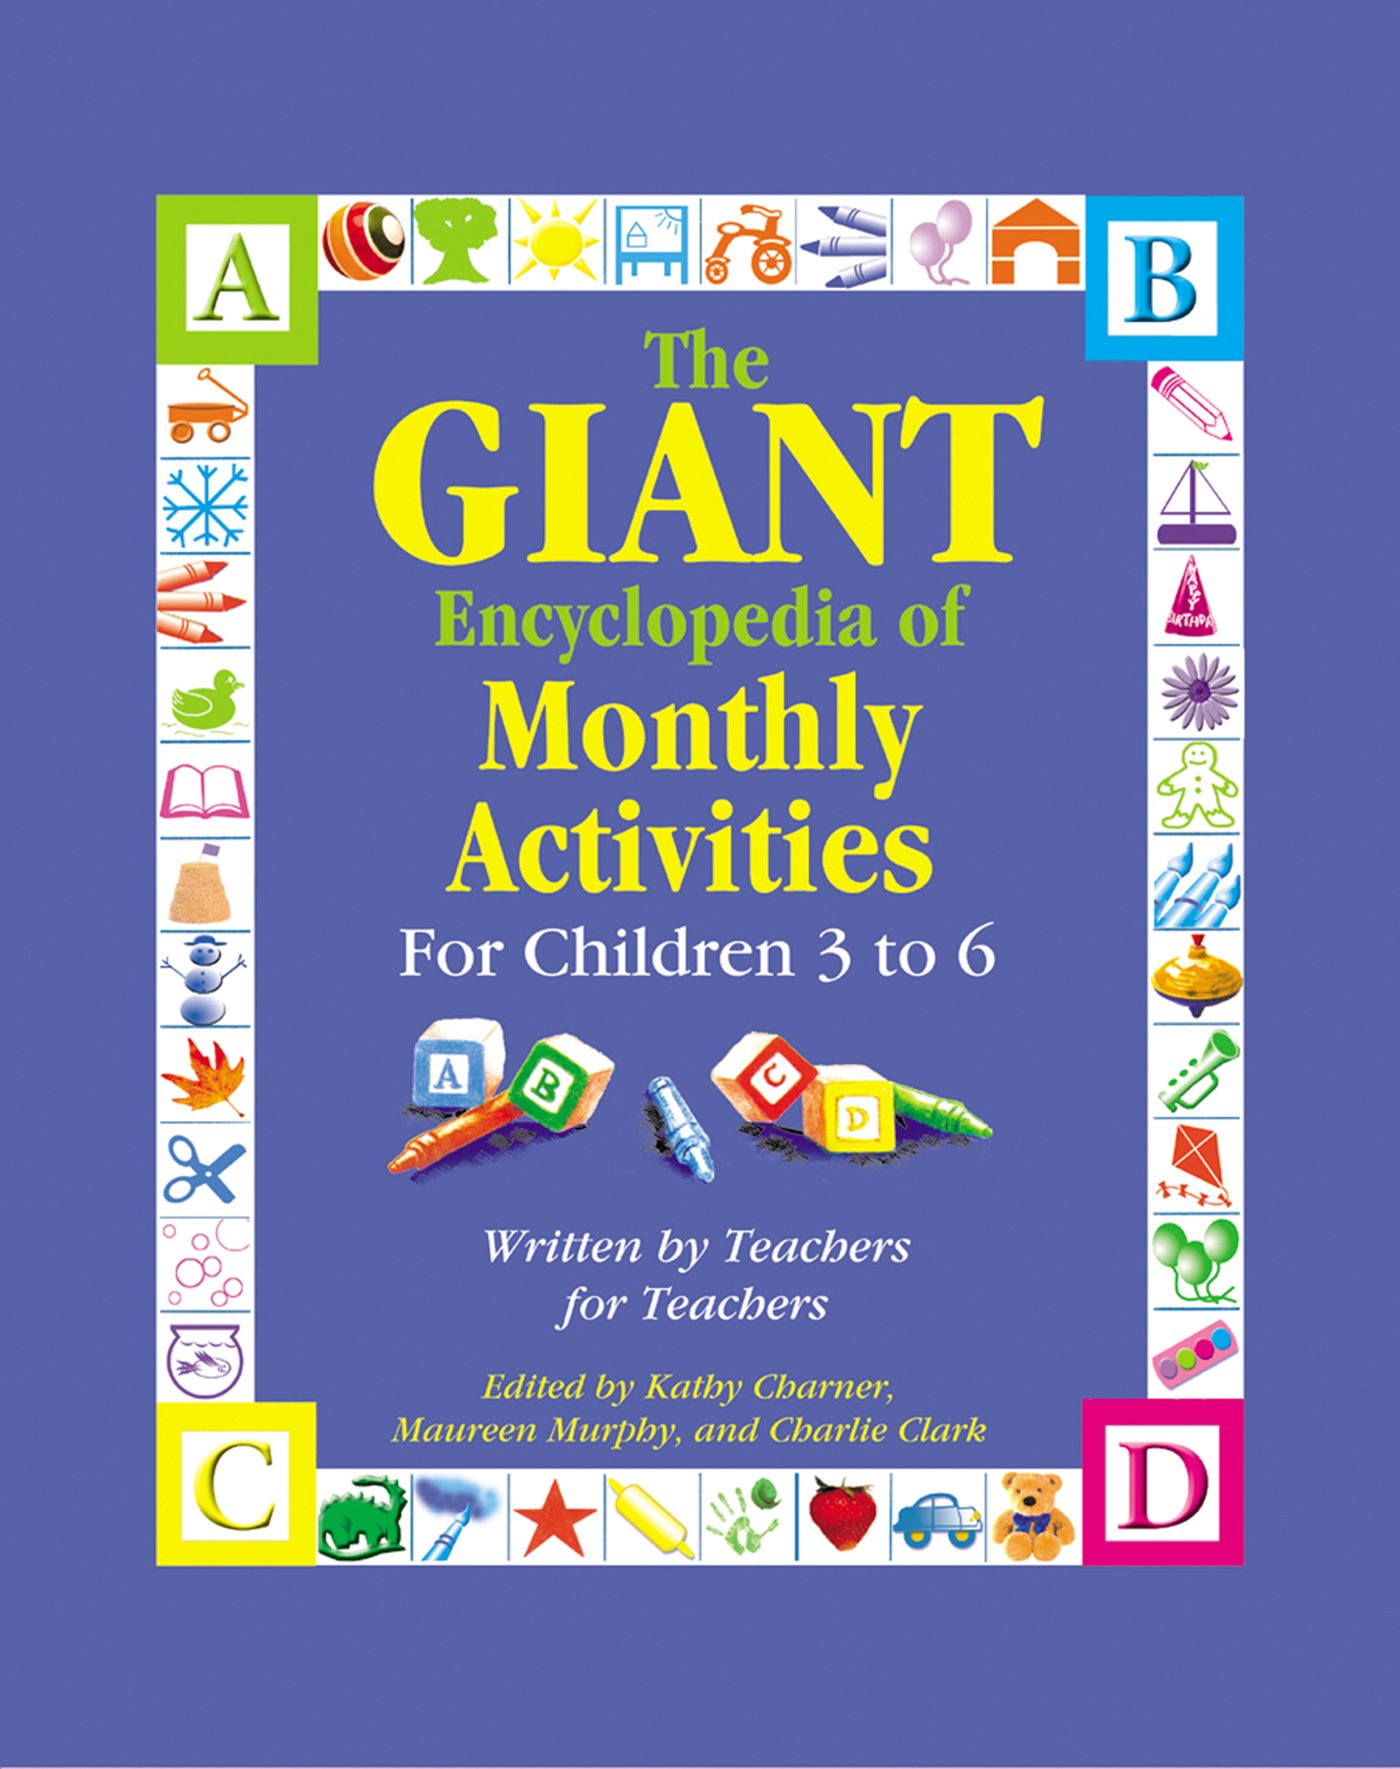 The GIANT Encyclopedia of Monthly Activities For Children 3 to 6